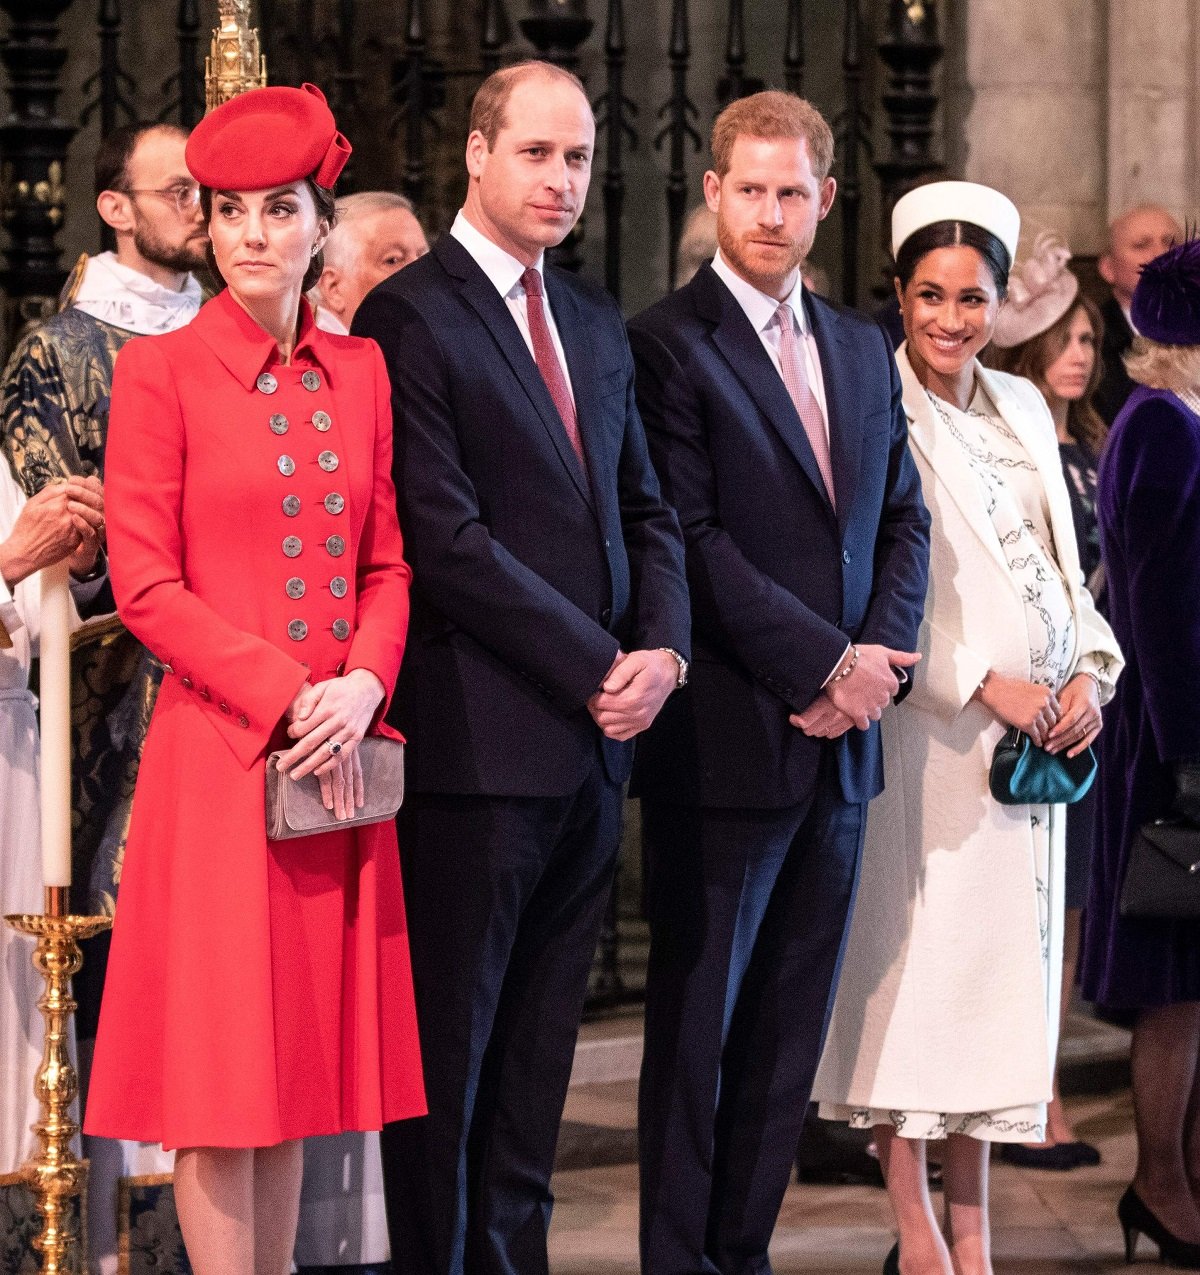 Kate Middleton, Prince William, Prince Harry, and Meghan Markle attend the 2019 Commonwealth Day service at Westminster Abbey